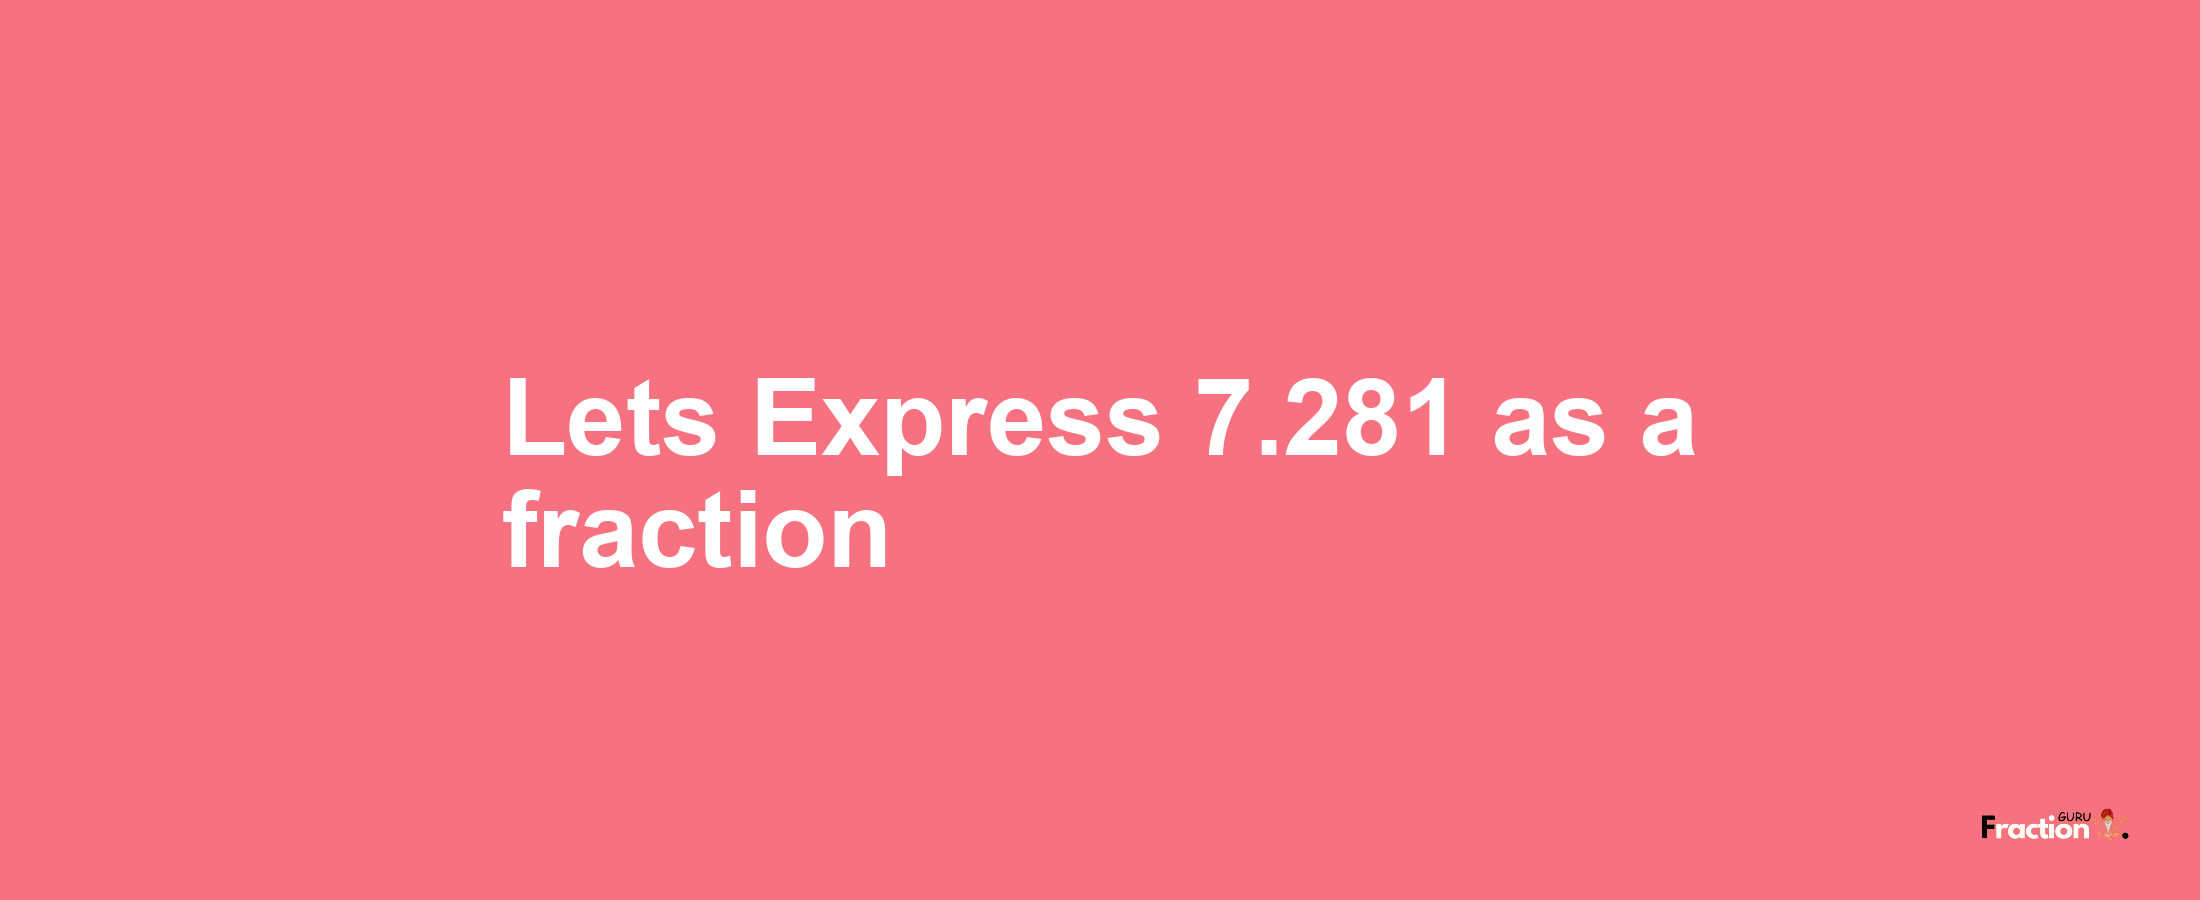 Lets Express 7.281 as afraction